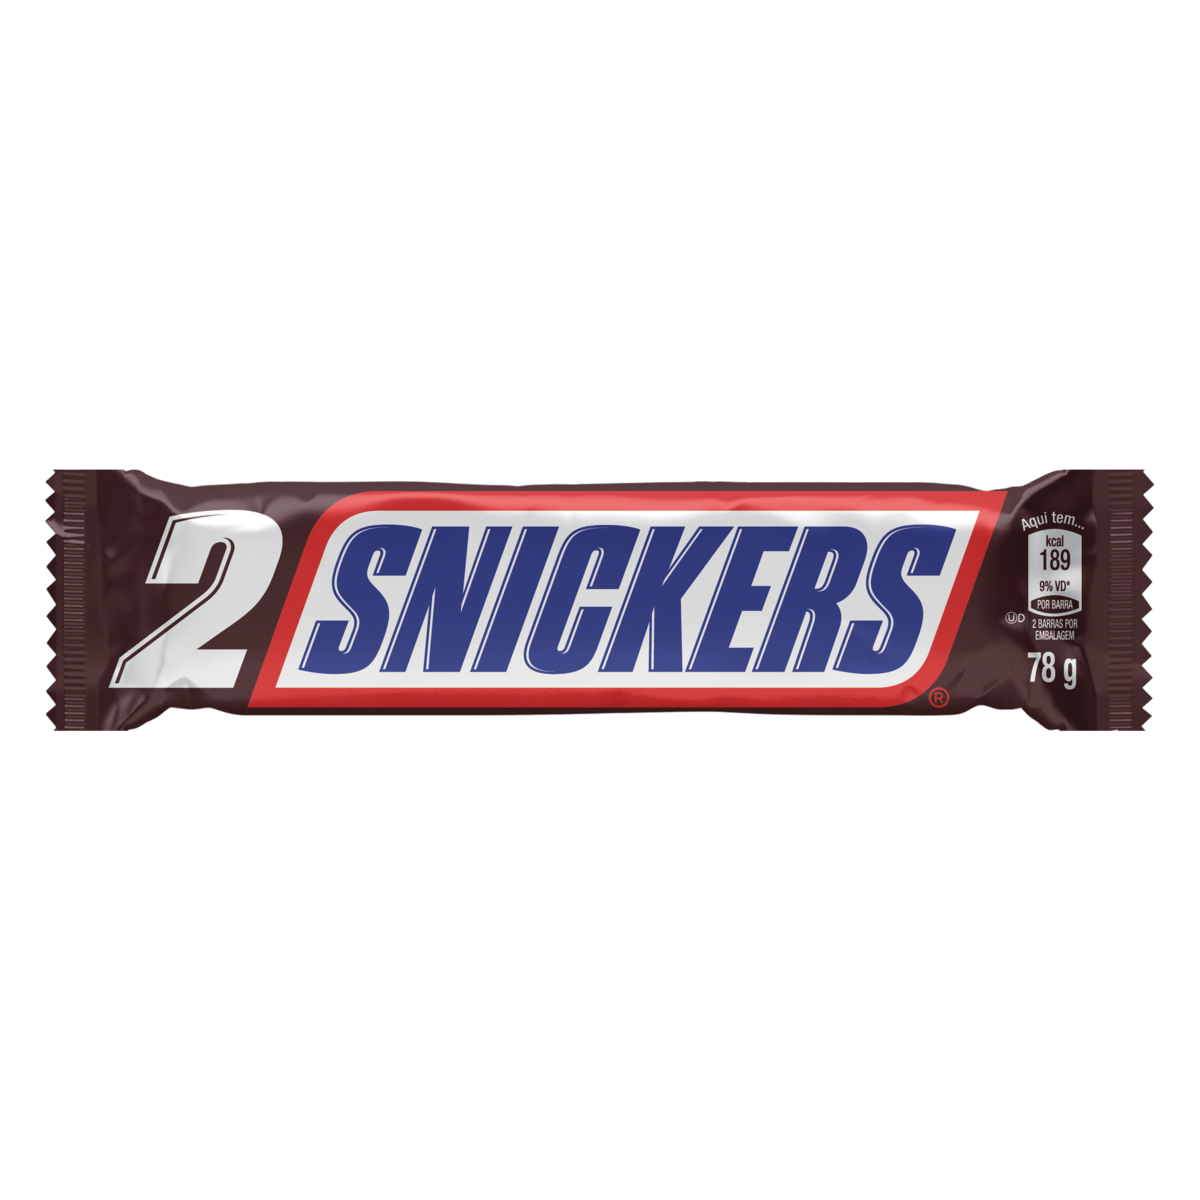 7896423420326 - CHOCOLATE SNICKERS PACOTE 78G 2 UNIDADES